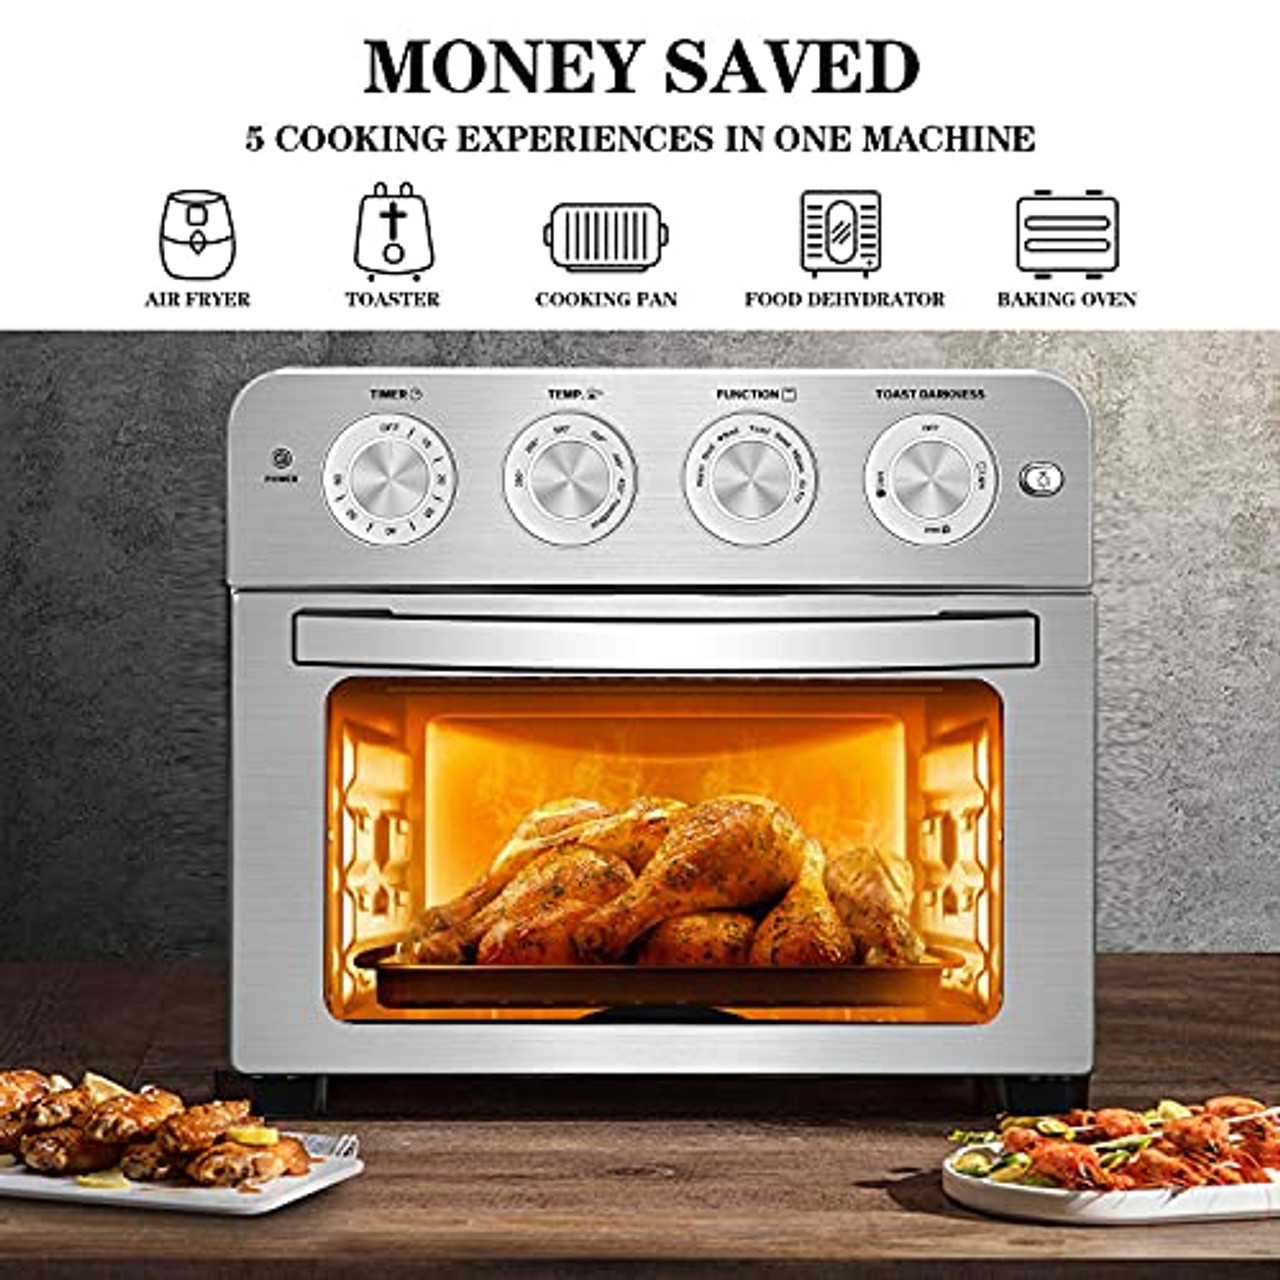 Geek Chef Air Fryer, 7-in-1 Air Fryer Oven, 6 Slice 24.5QT Air Fryer  Toaster Oven Combo, Roast, Bake, Broil, Reheat, Fry Oil-Free, Extra Large  Convection Countertop Oven, Accessories Included, Stainless Steel, ETL